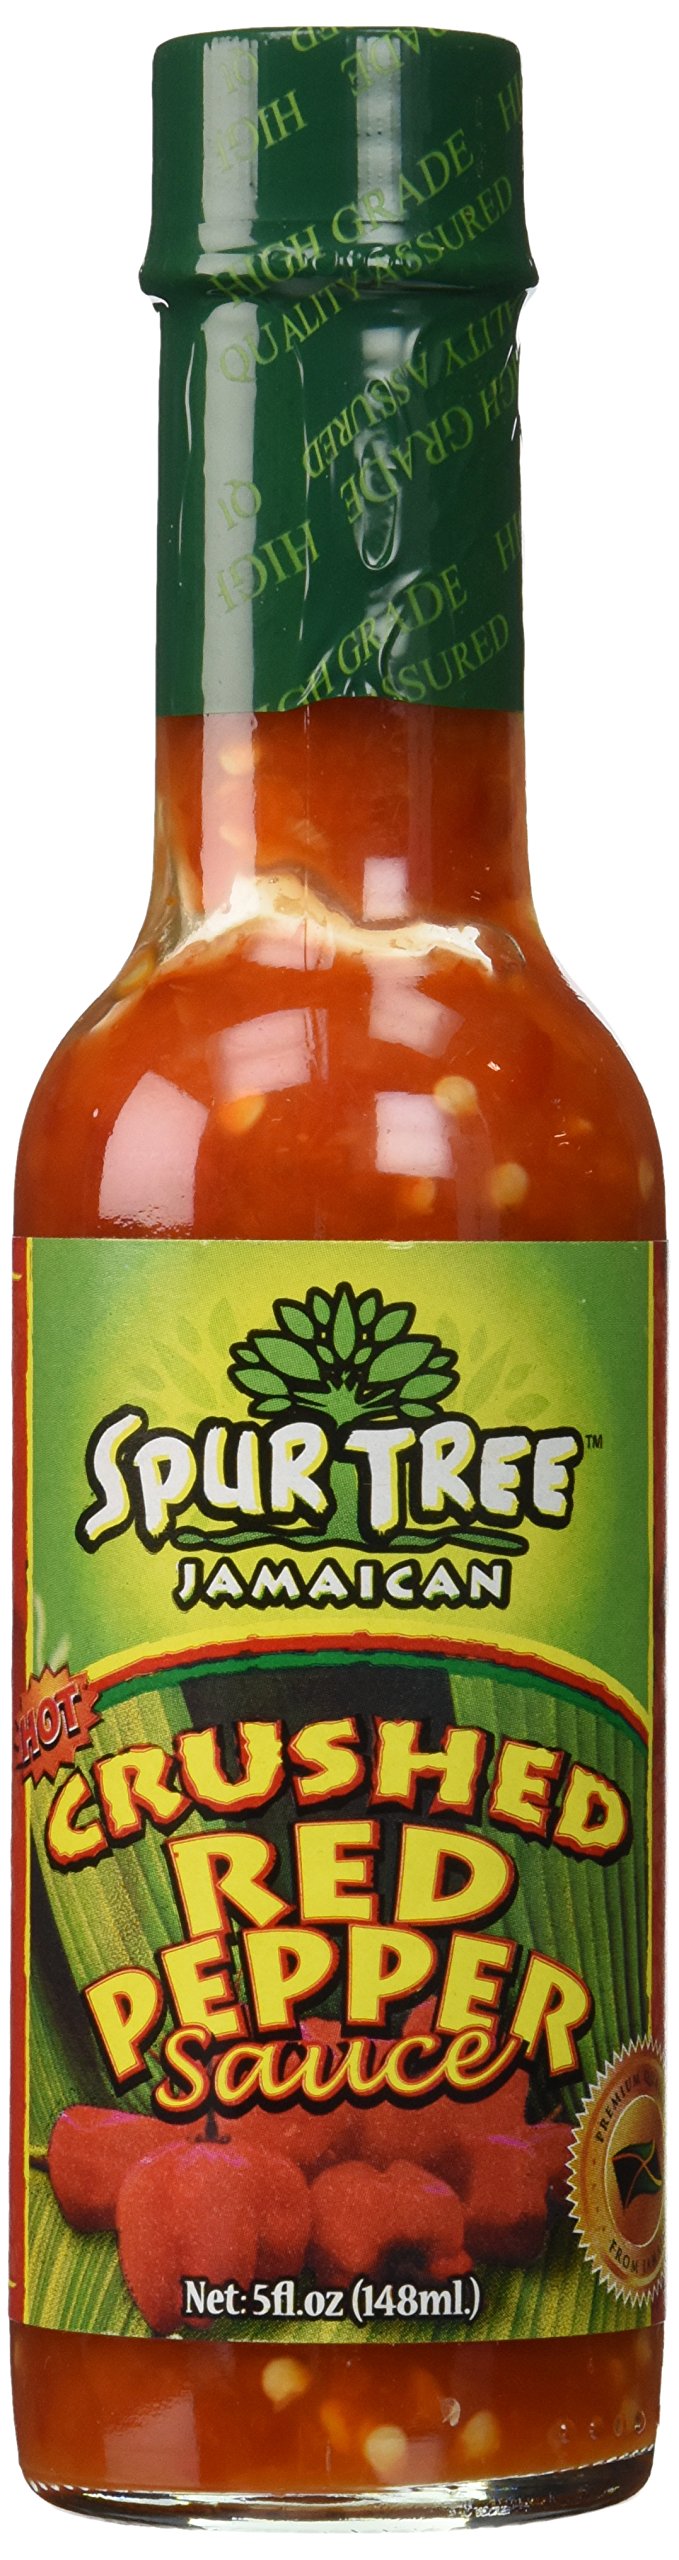 Spur Tree Crushed Red Pepper Sauce  Organic Crushed Red Pepper Sauce for an Authentic Jamaican Experience  Organic Red Pepper Sauce to Spice Up Your Dish (5 Oz, 2 Pack)